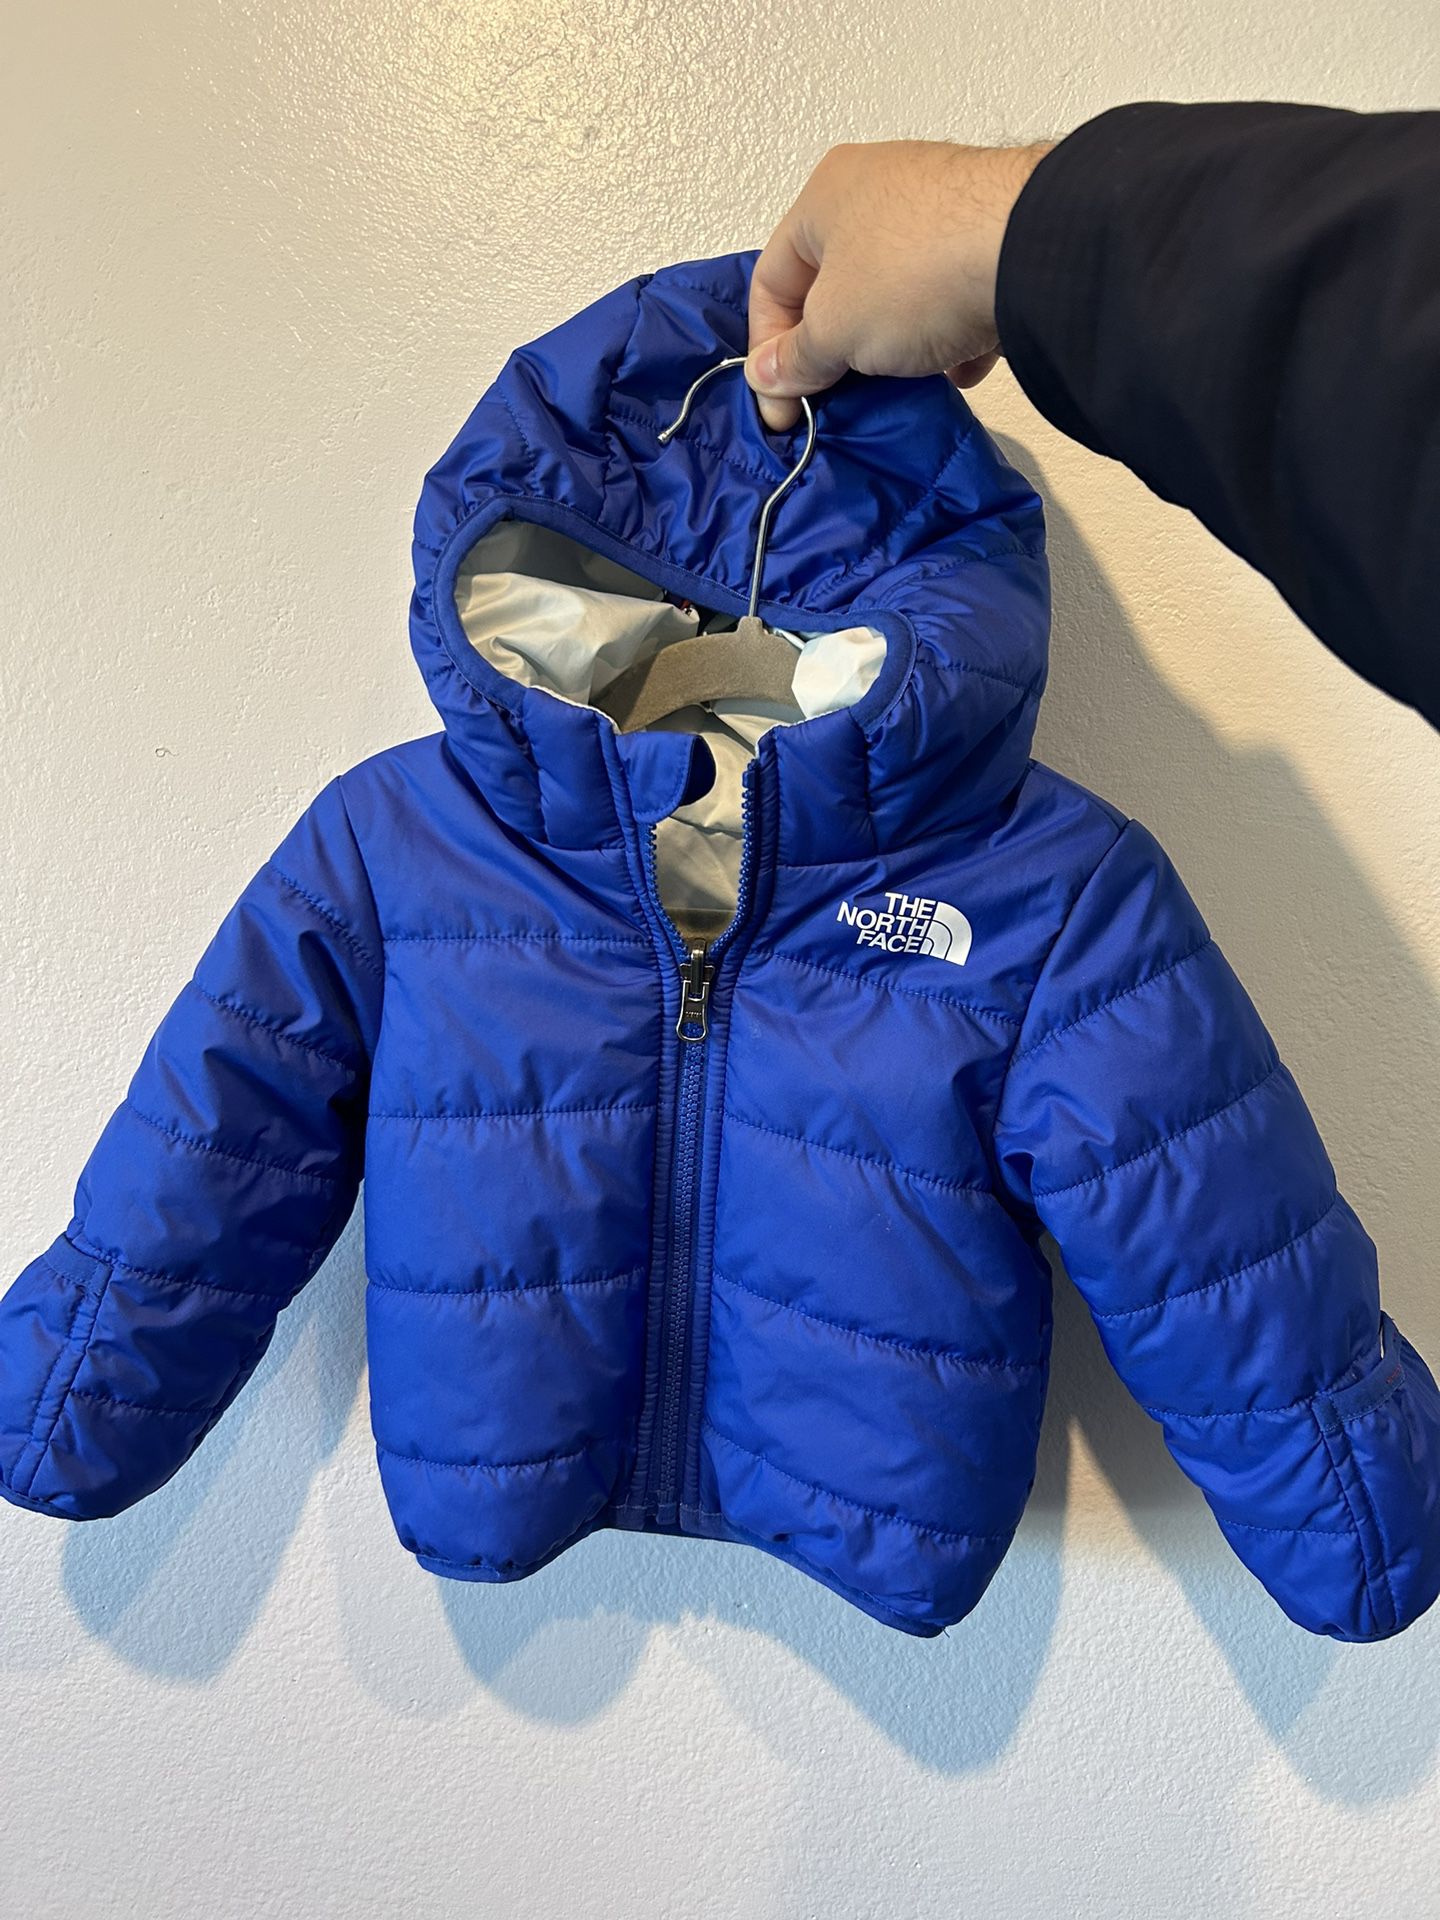 The North Face Toddler Puffer Jacket 6-12mo